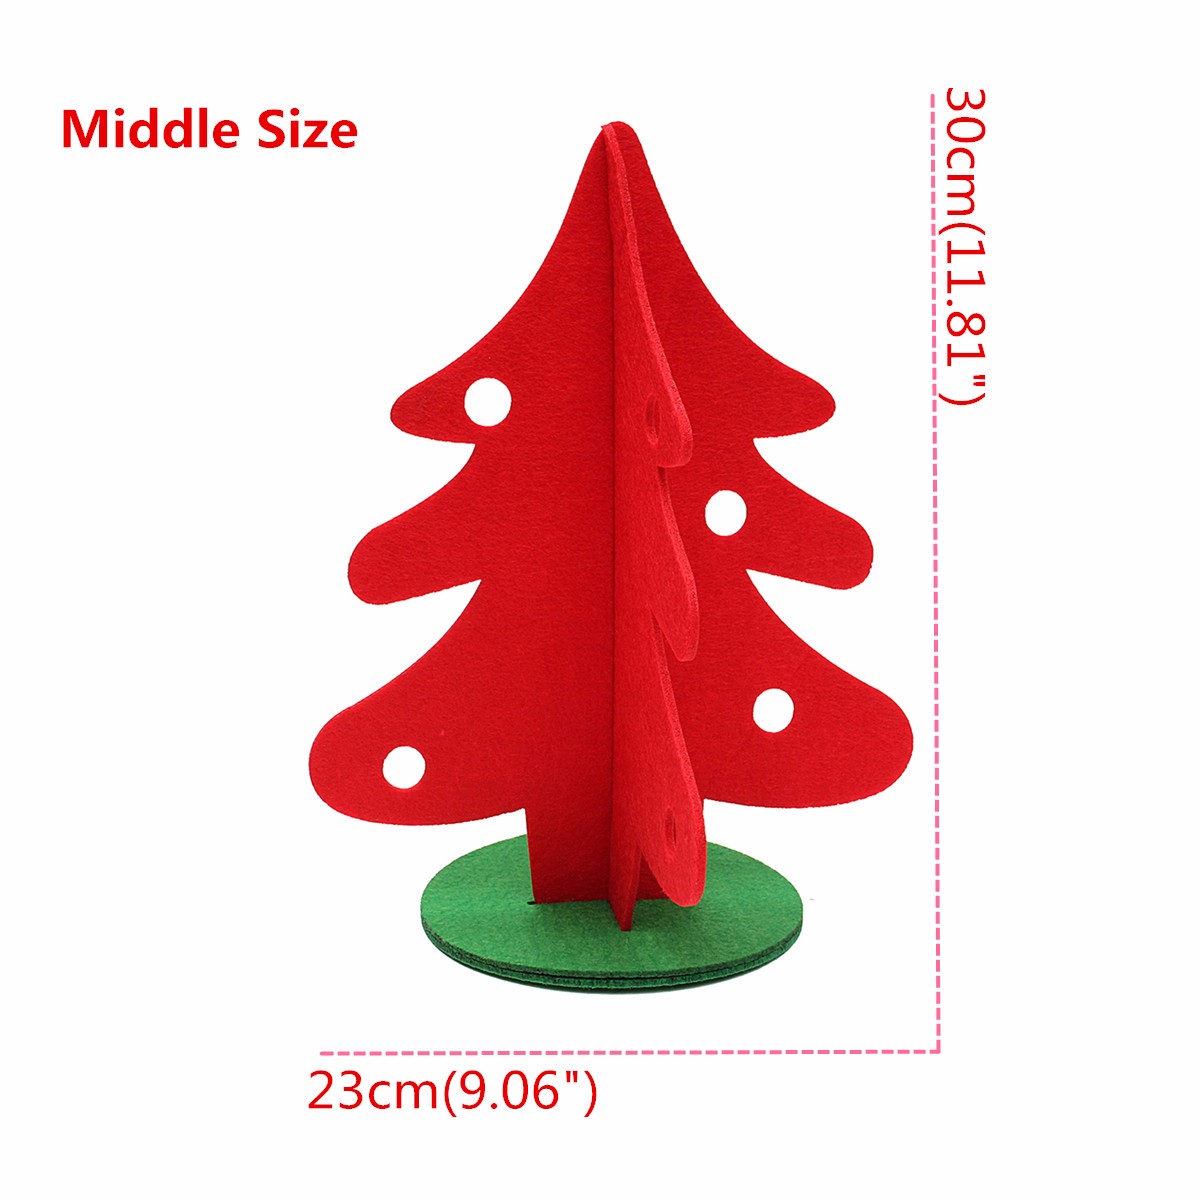 Vintage-Christmas-Tree-Home-Shop-Ornament-Decoration-Fabric-Red-Green-Tree-1103573-8